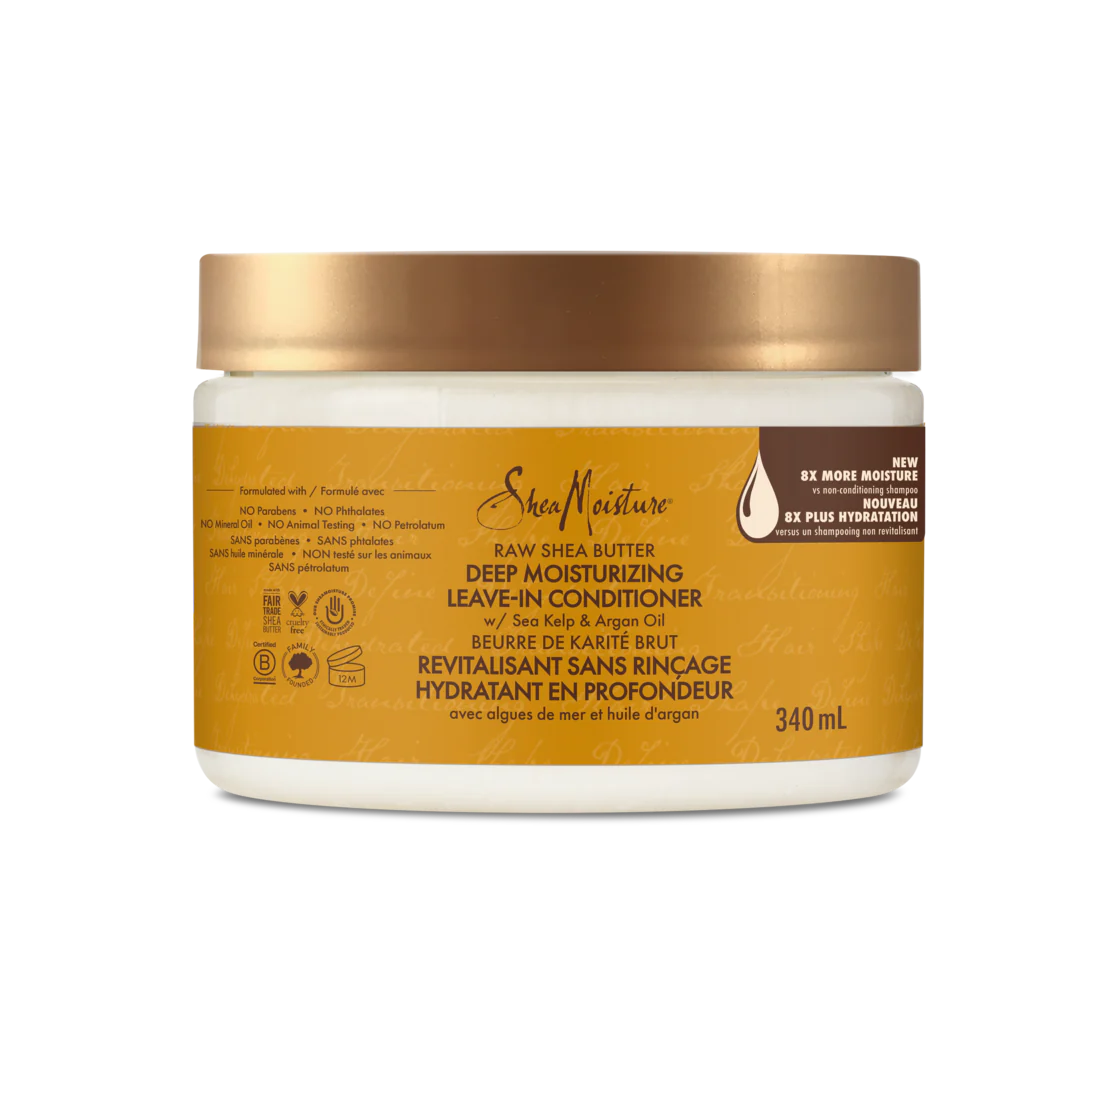 Shea Moisture Raw Shea Butter Leave In Conditioner 340mL